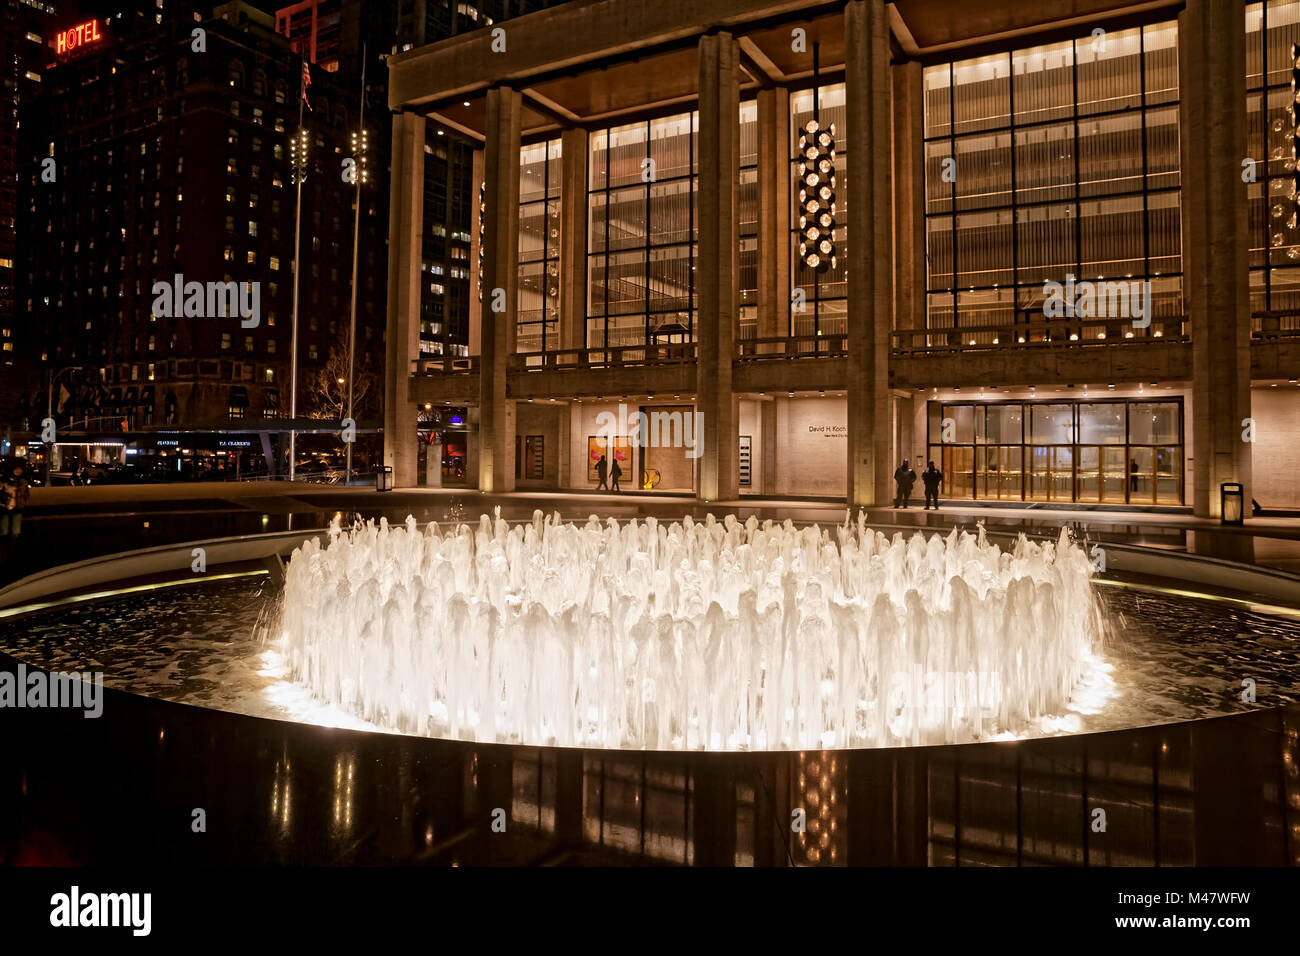 New York David H. Koch Theater Banque D'Images